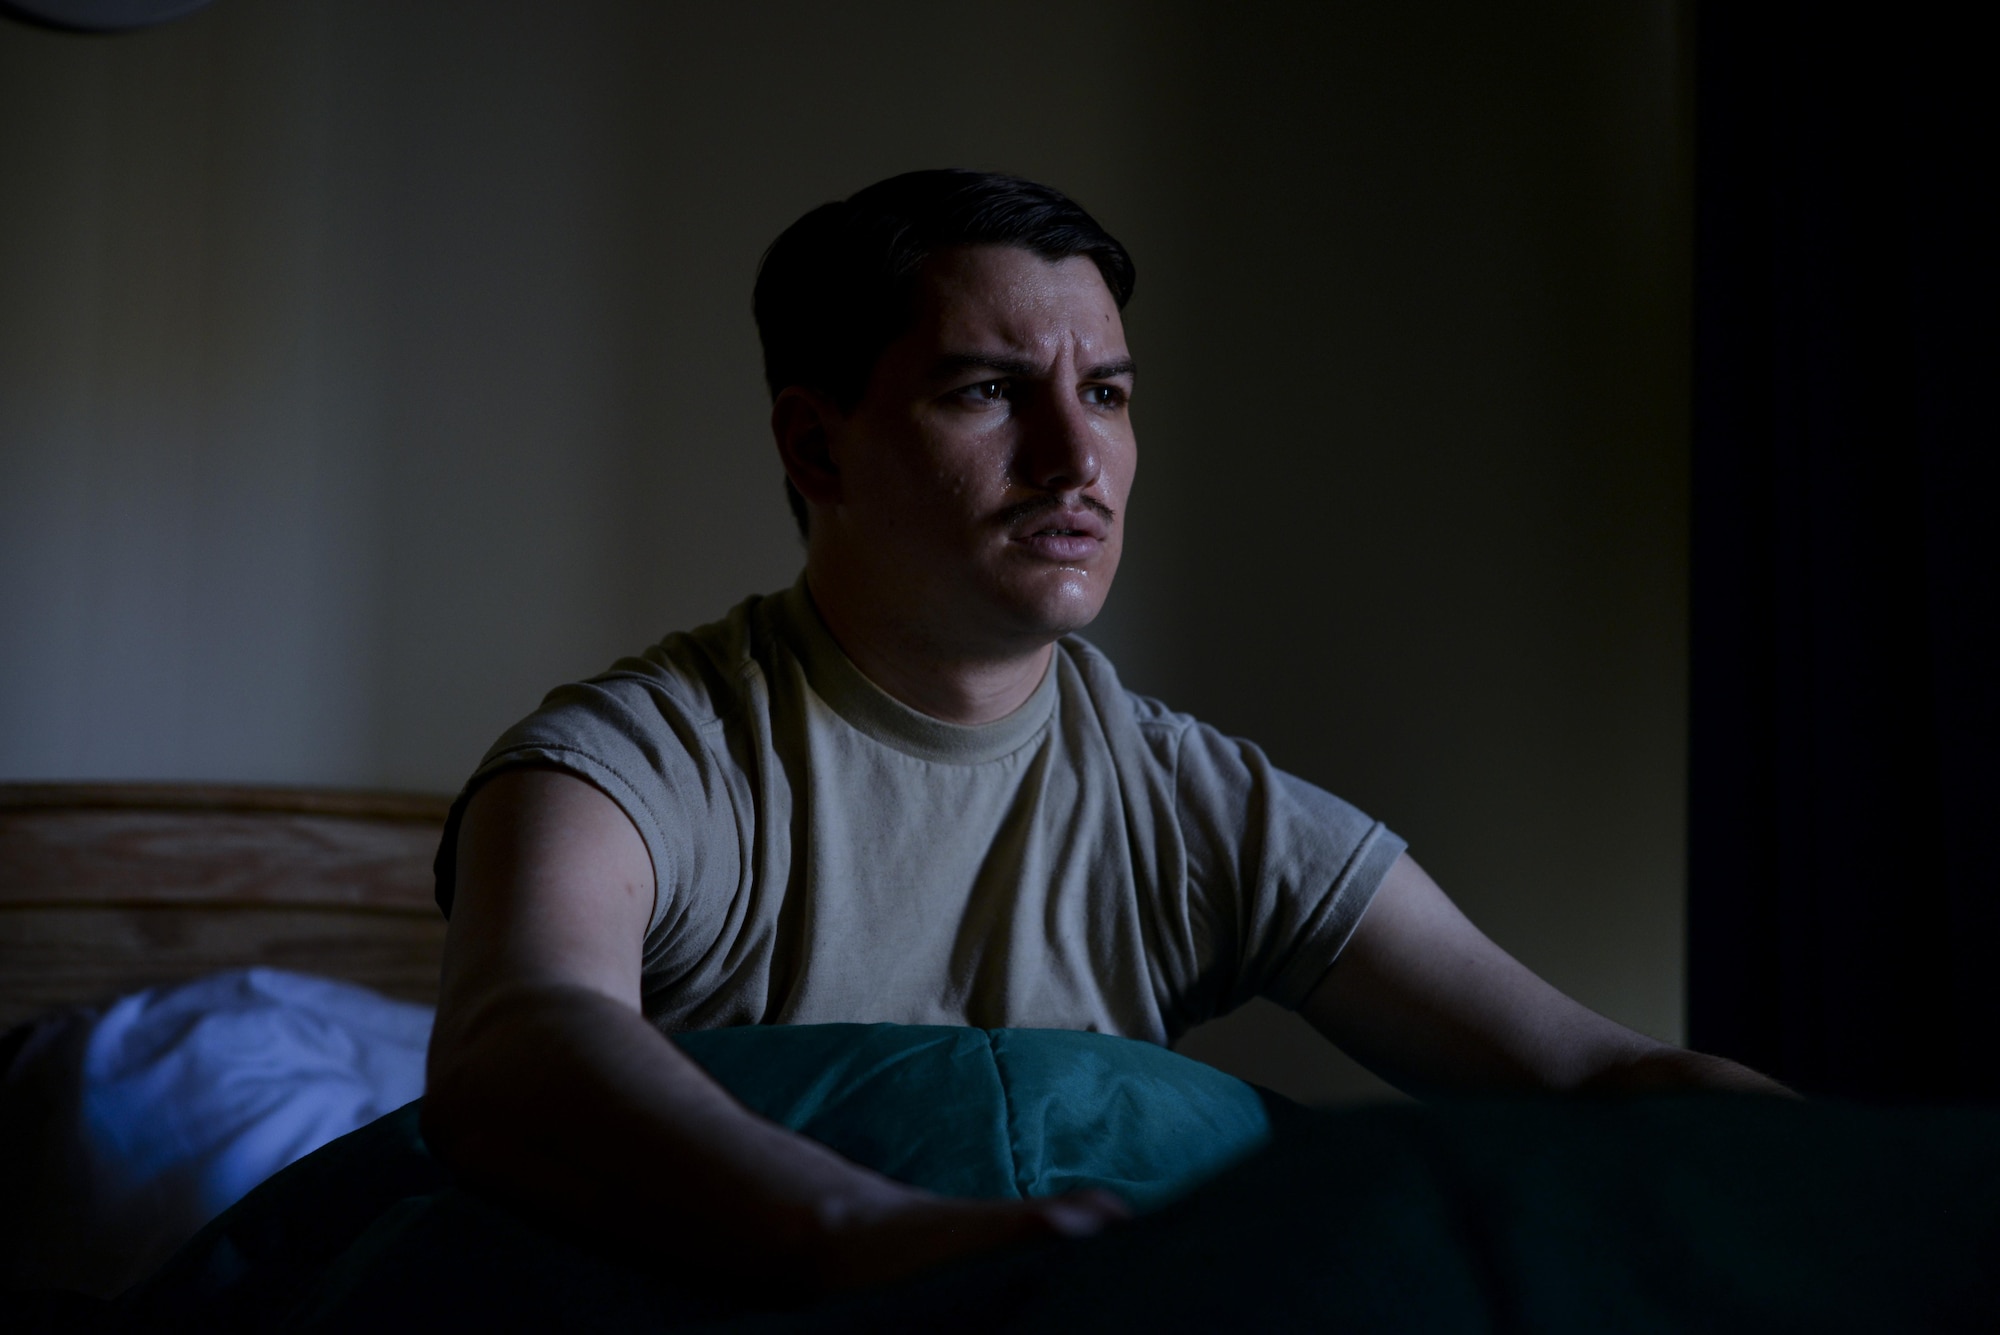 Lack of sleep can be attributed to post-traumatic stress disorder, stress anxiety or depression among several other mental ailments. Individuals experiencing insomnia or other sleep issues should contact their medical provider as soon as possible. (U.S. Air Force photo/Staff Sgt. Micaiah Anthony)